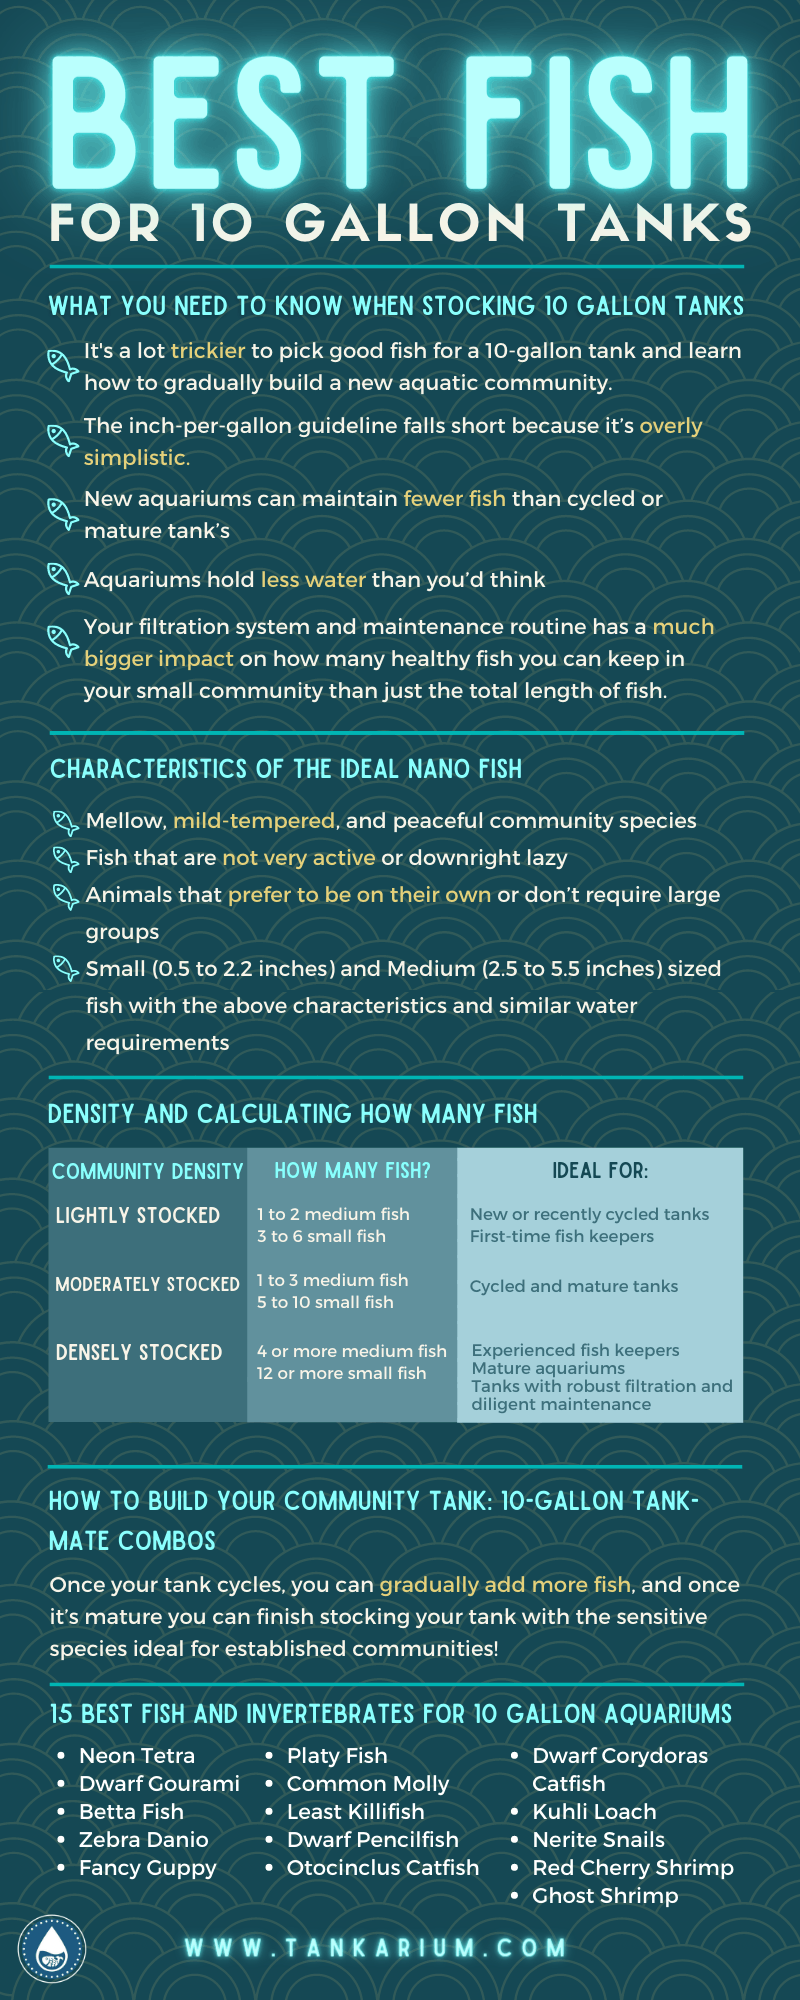 Best Fish for 10 Gallon Tanks - Infographic